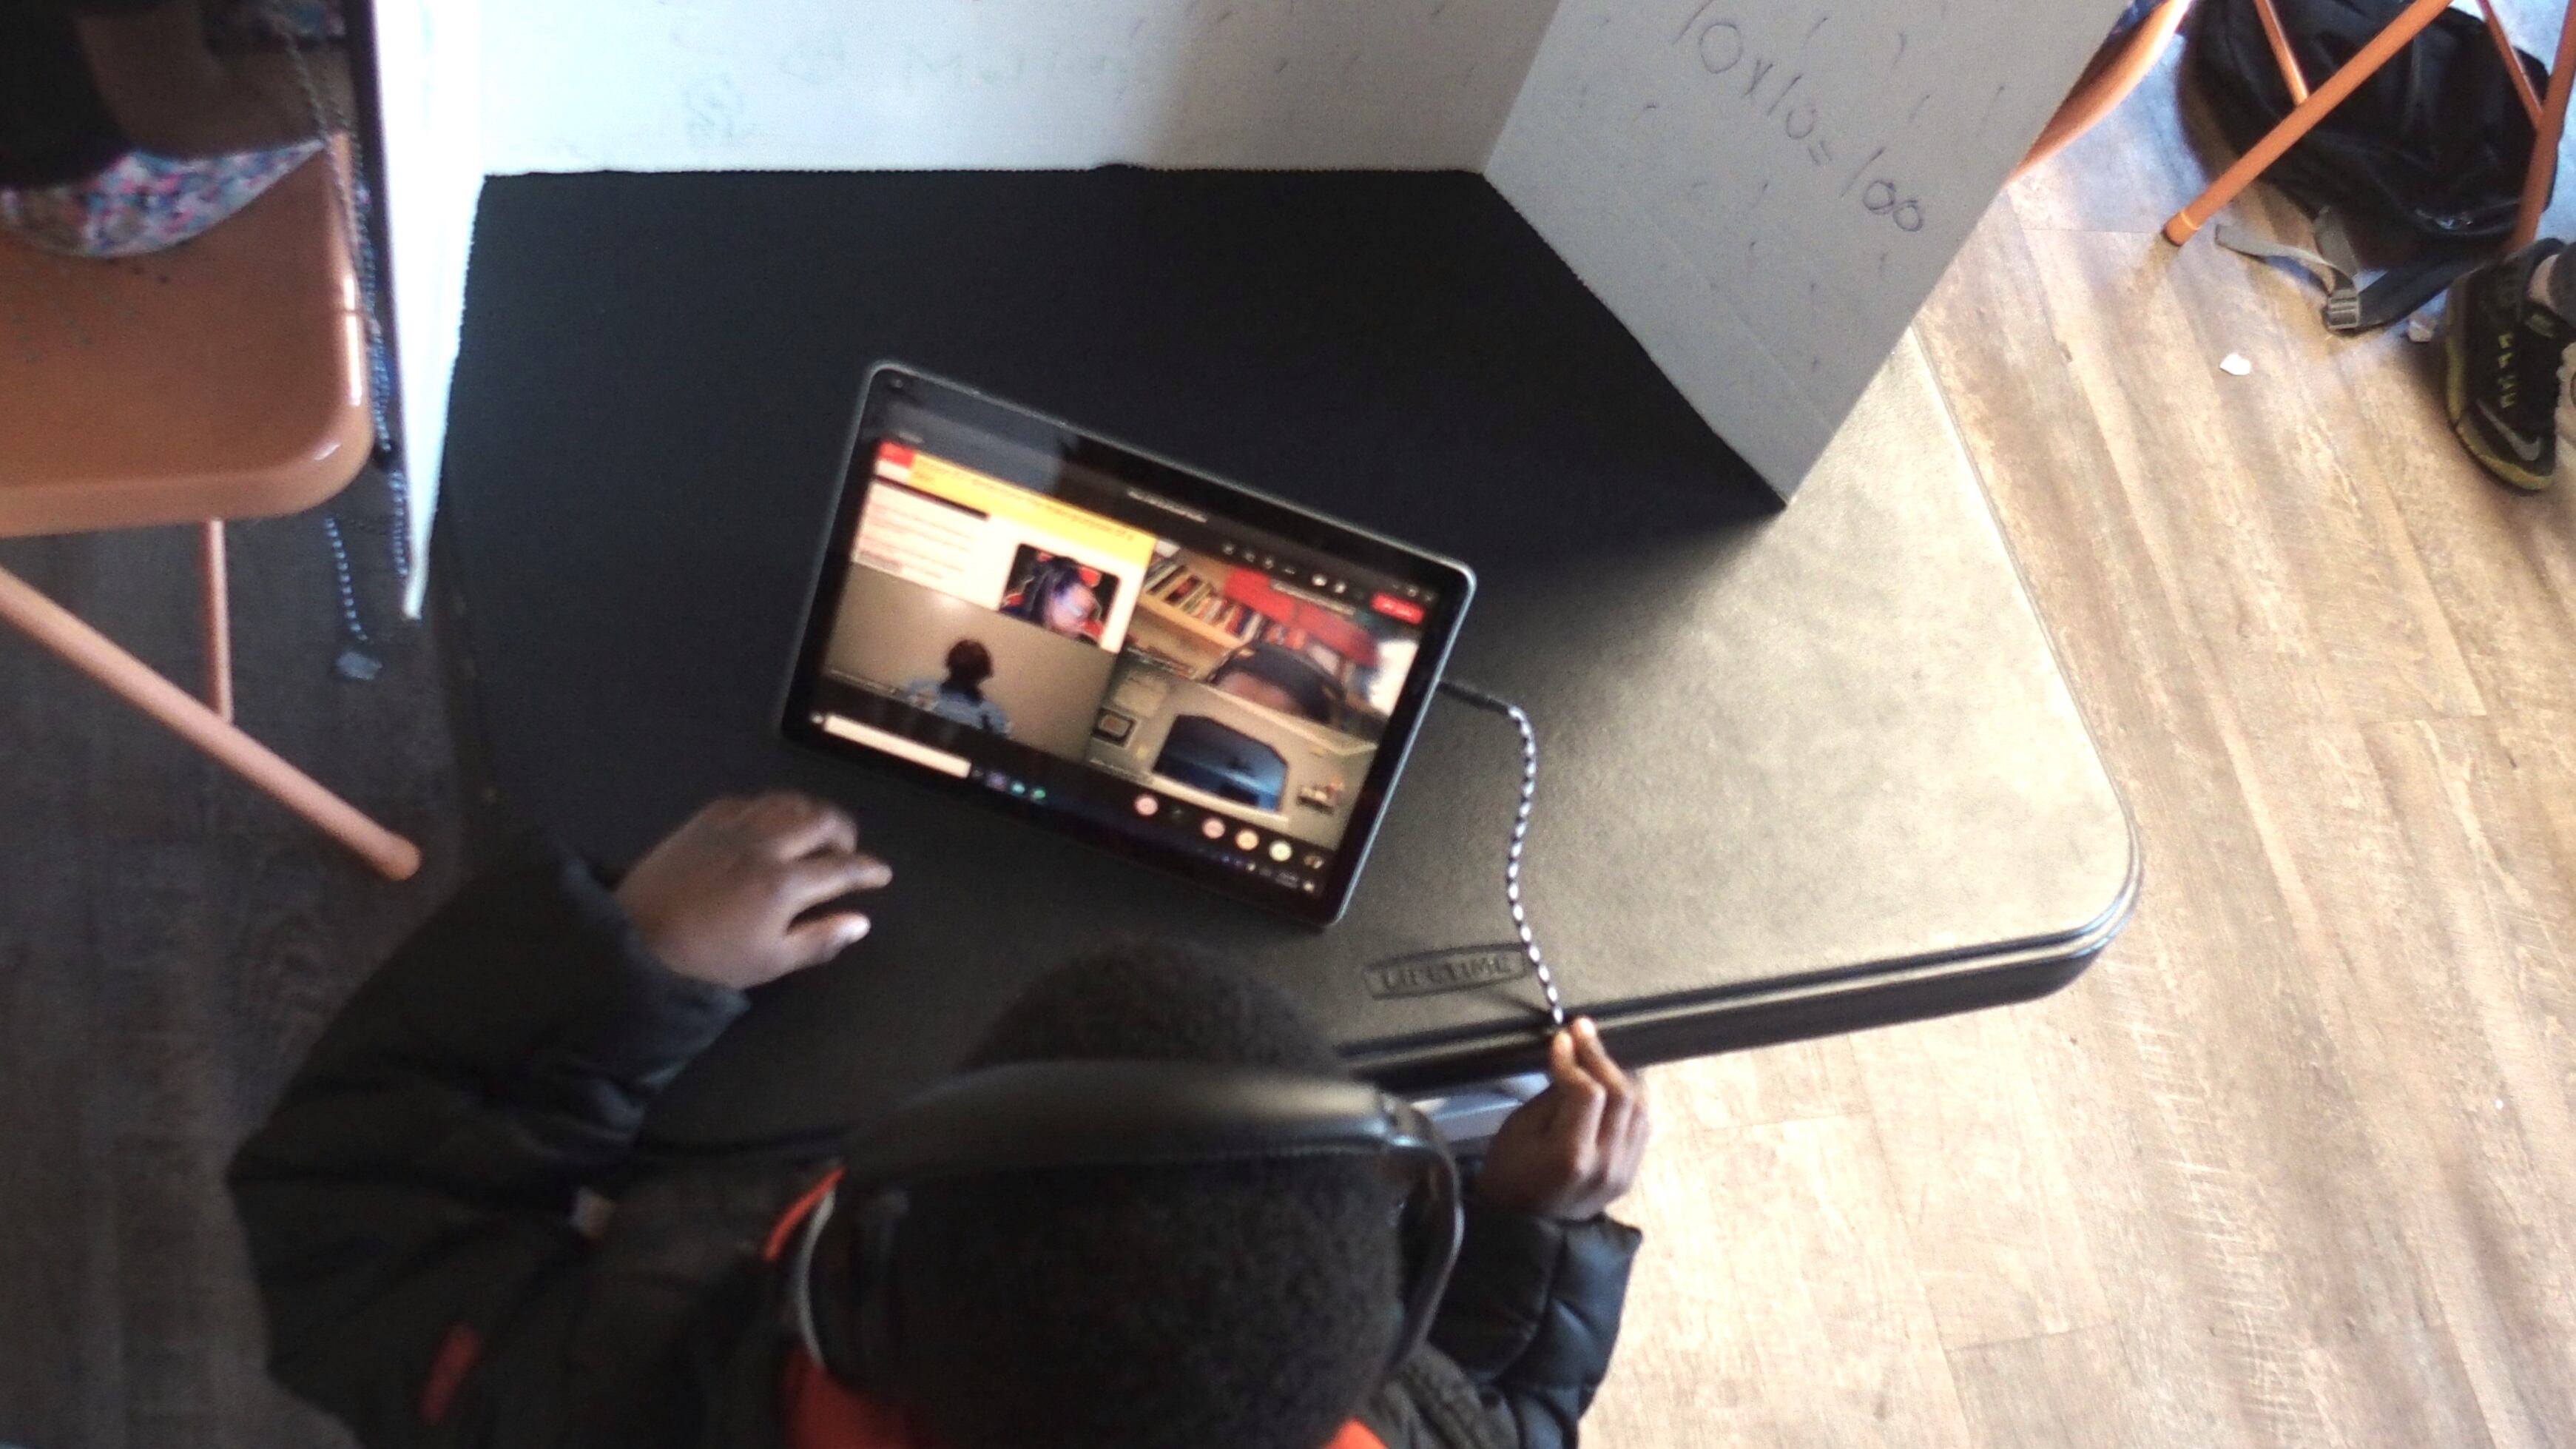 A young boy in a black and orange hoodie conducts virtual learning on his computer, sitting at a black partitioned desk.